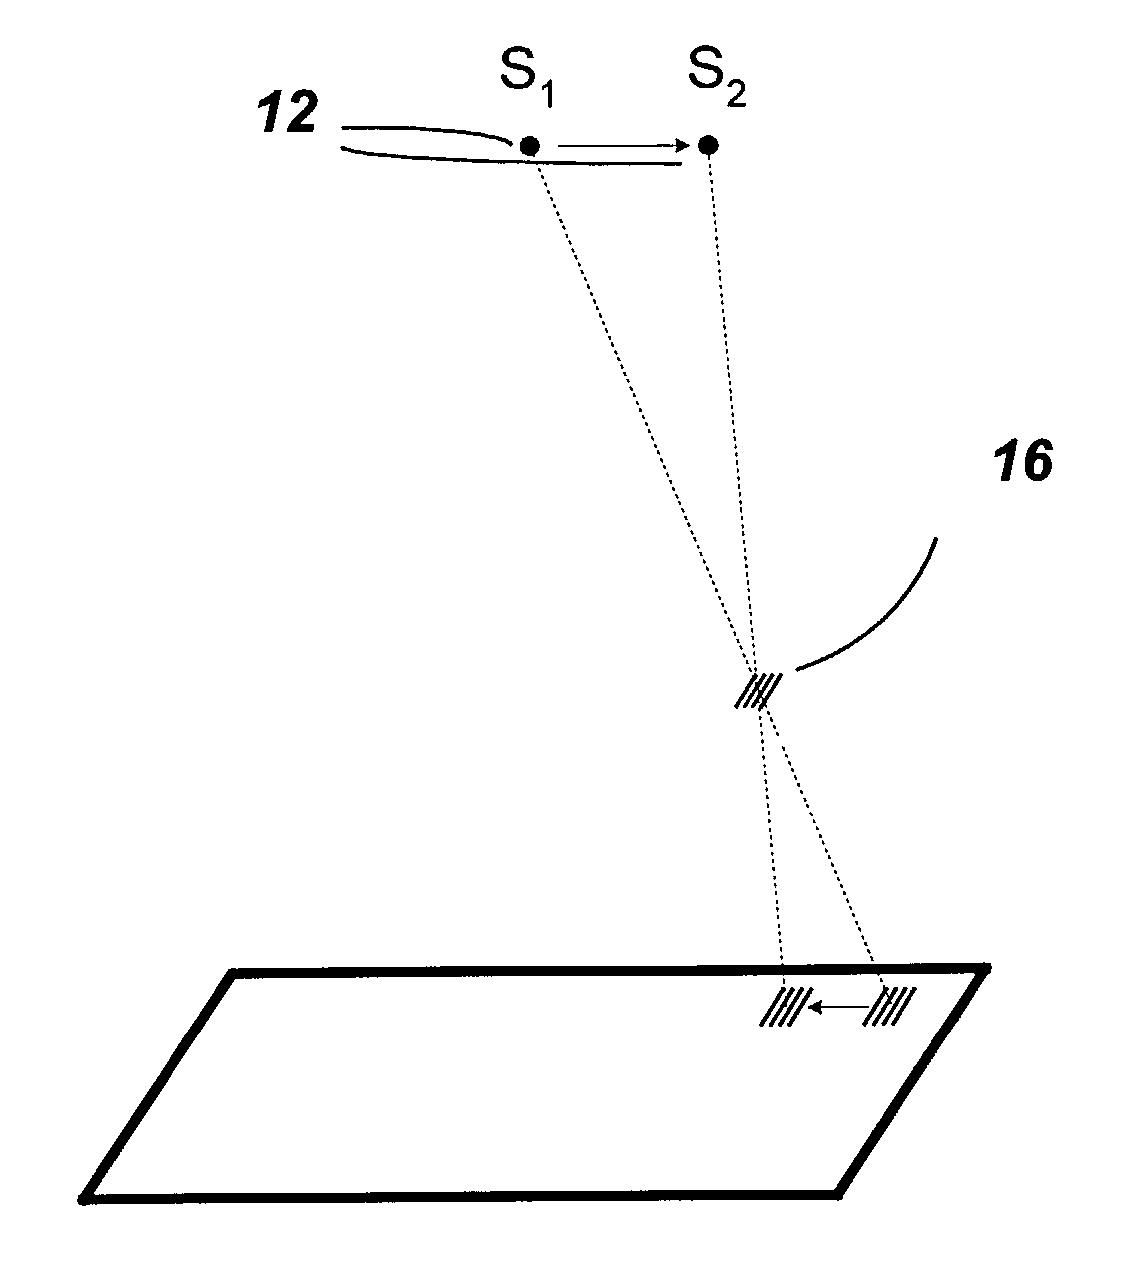 Image positioning method and system for tomosynthesis in a digital X-ray radiography system